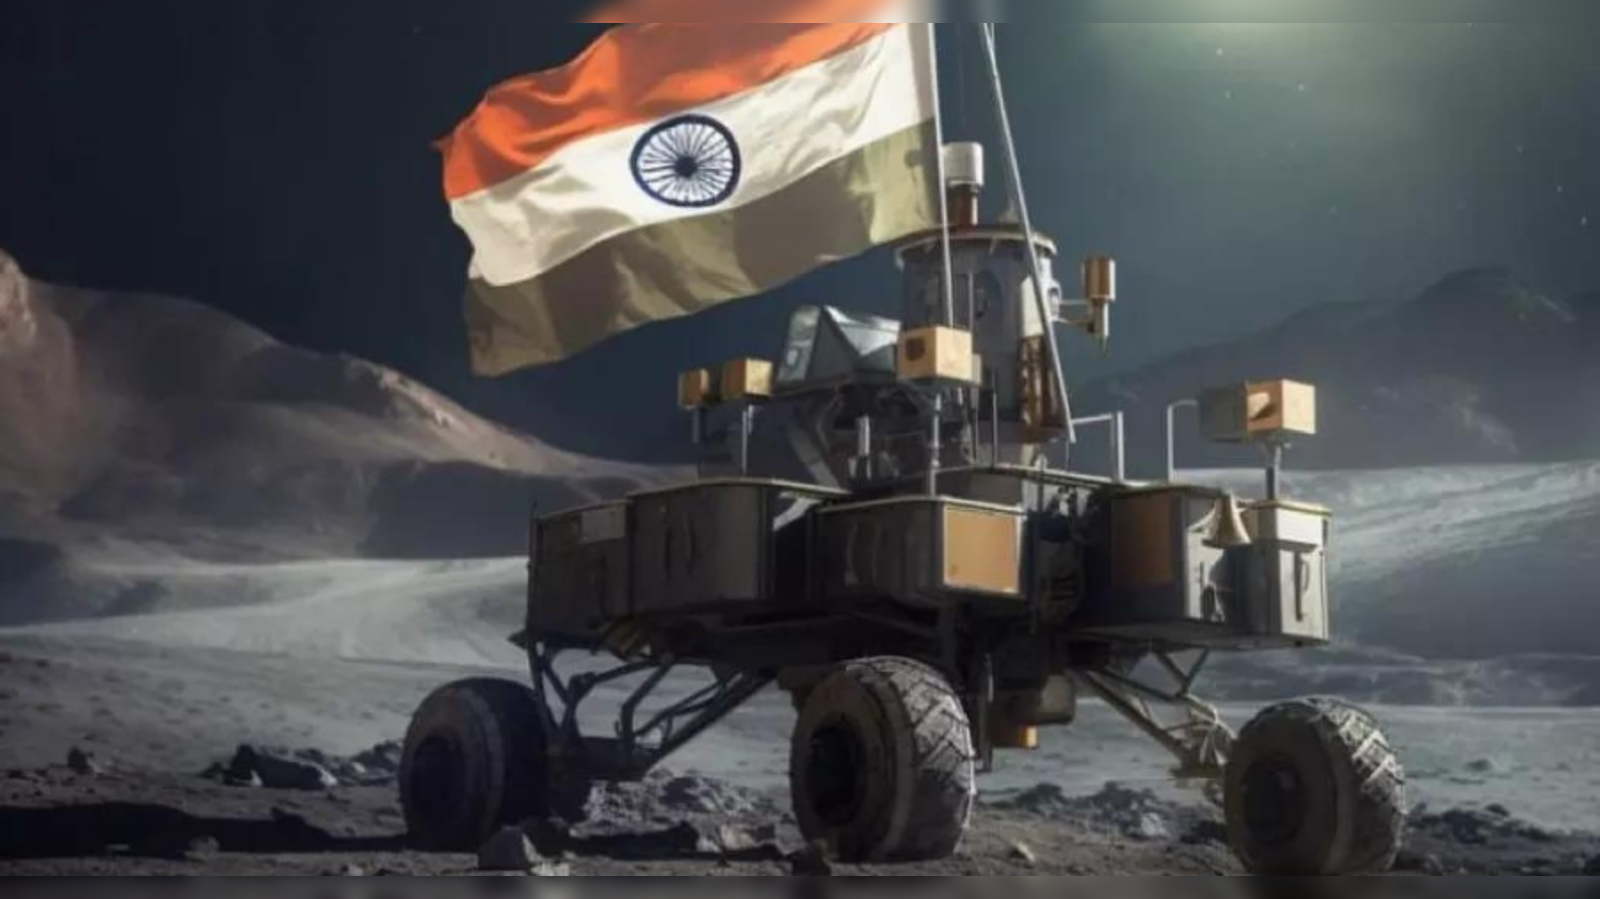 UK news anchor says India shouldn't ask for foreign aid after Chandrayaan  3. Indians remind him of $45 tn Britain looted from India - The Economic  Times